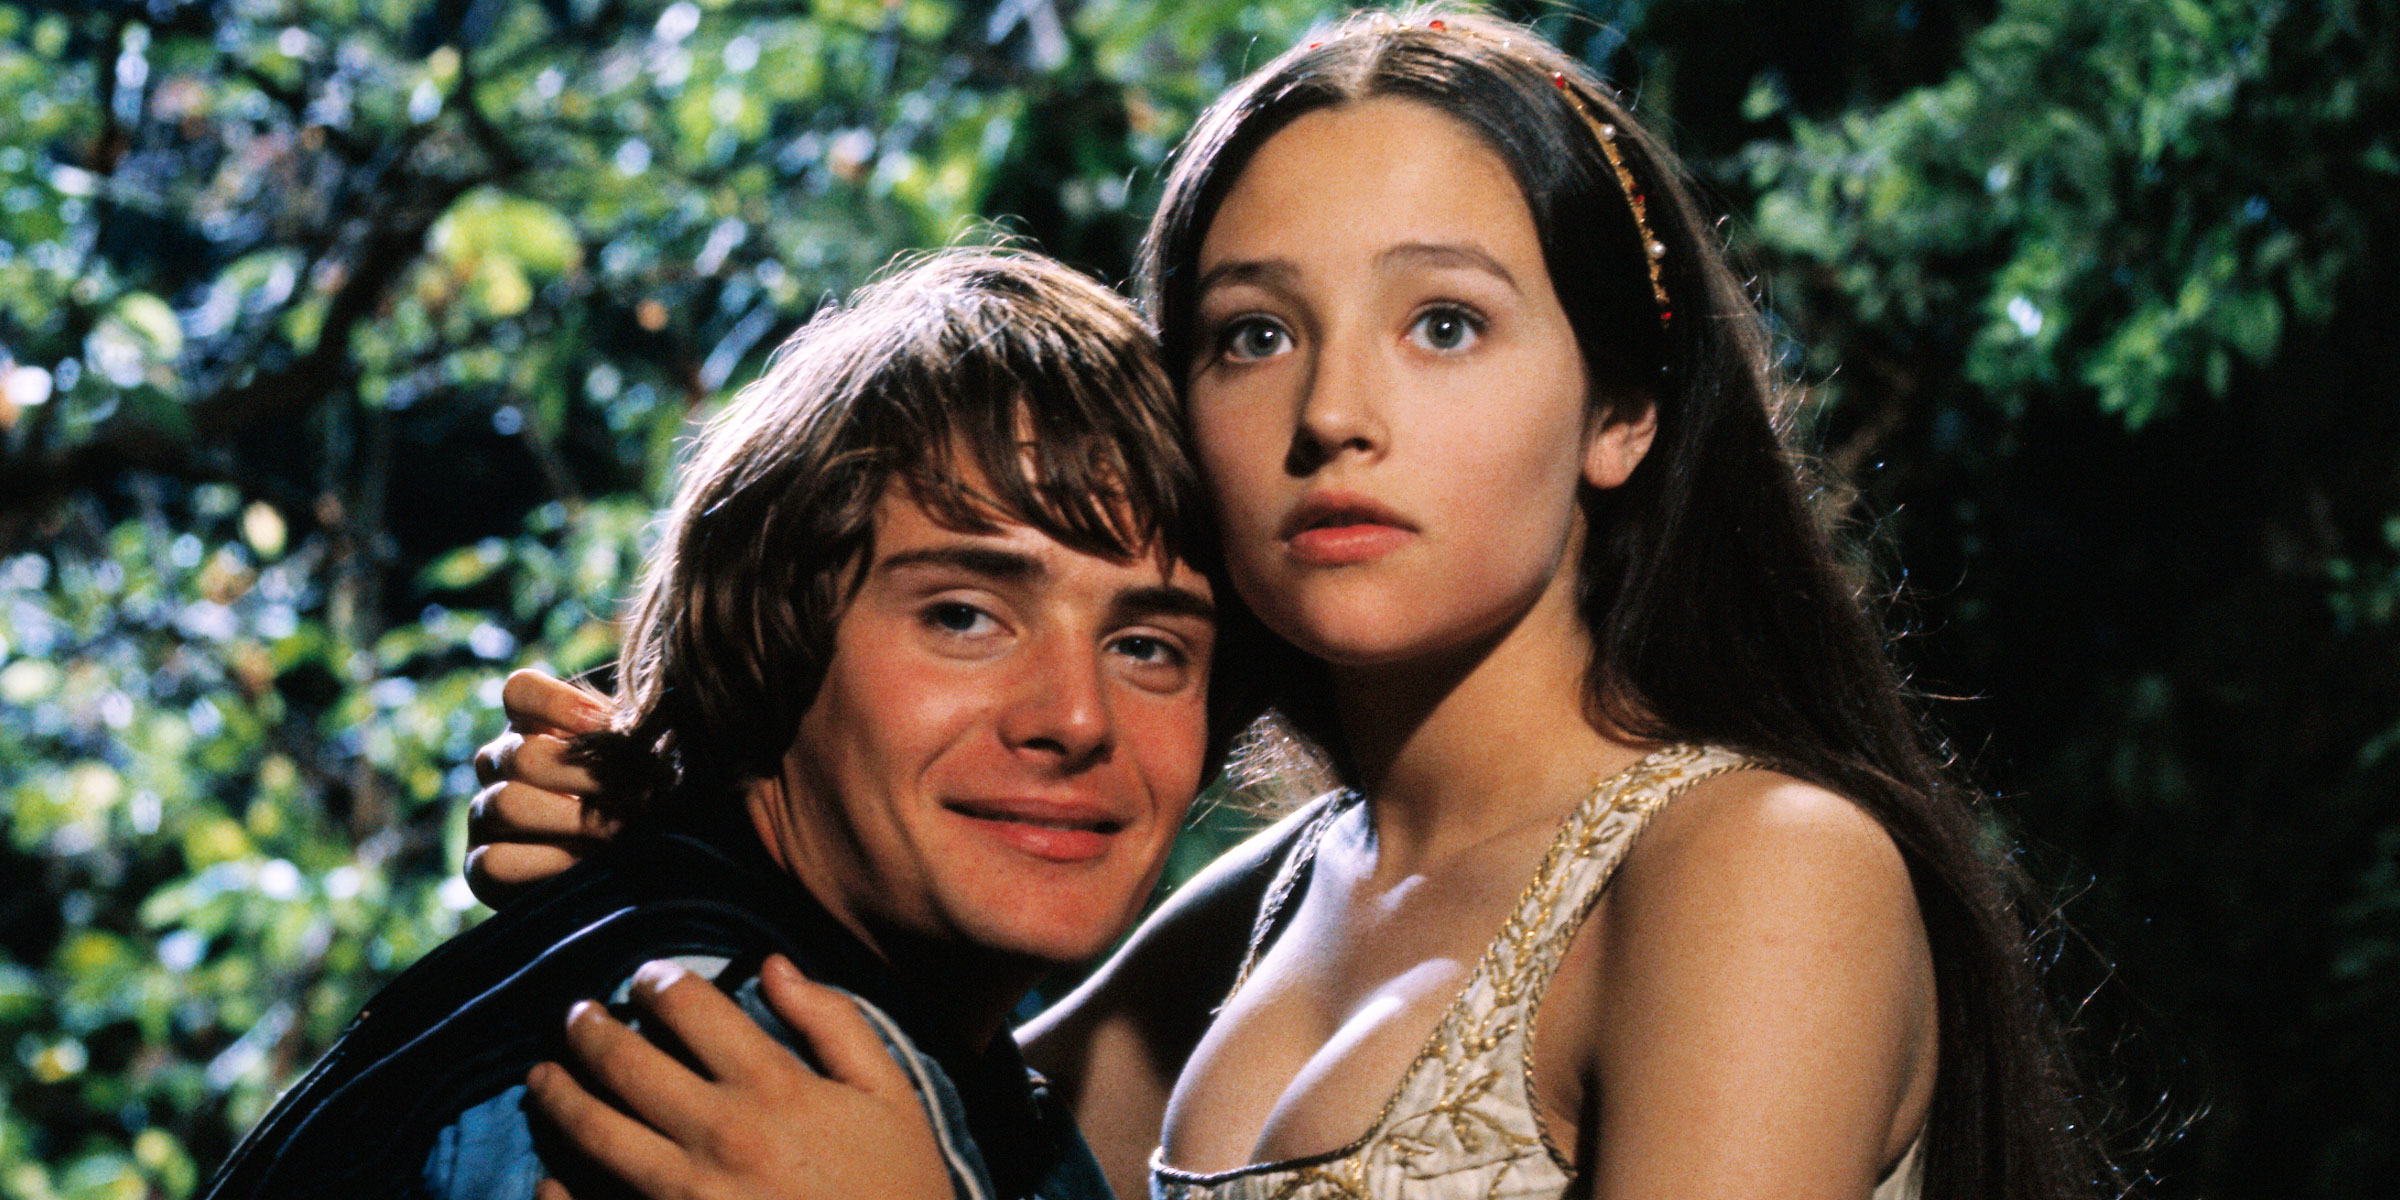 Romeo and Juliet Stars Sue Paramount for Being Coerced Into Underage, Nude Sex Scene The Mary picture